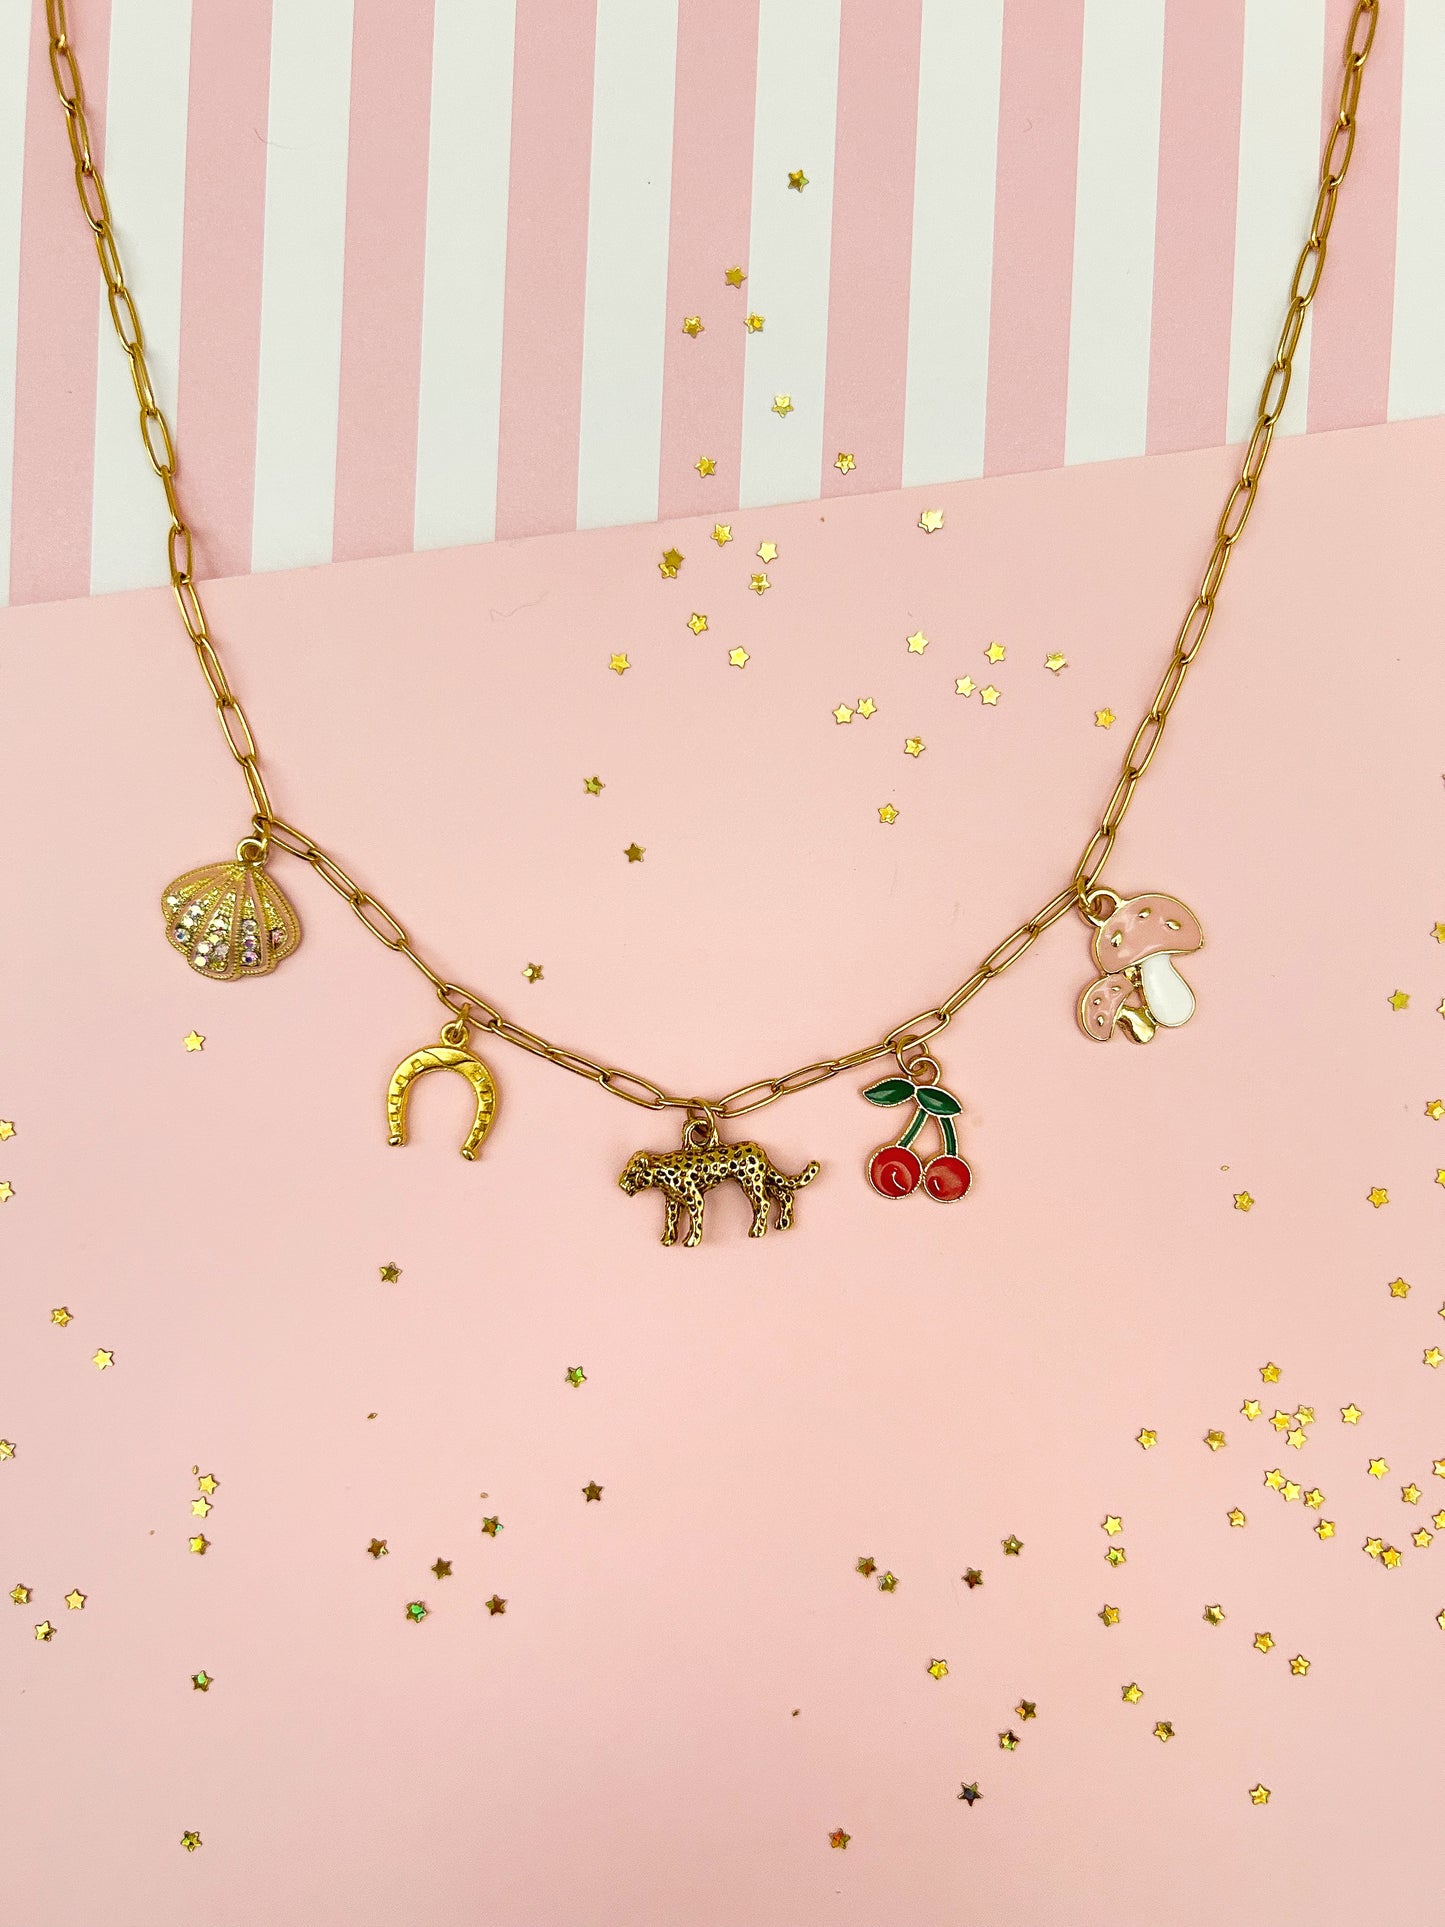 Favorite Things Charm Necklace - Design Your Own